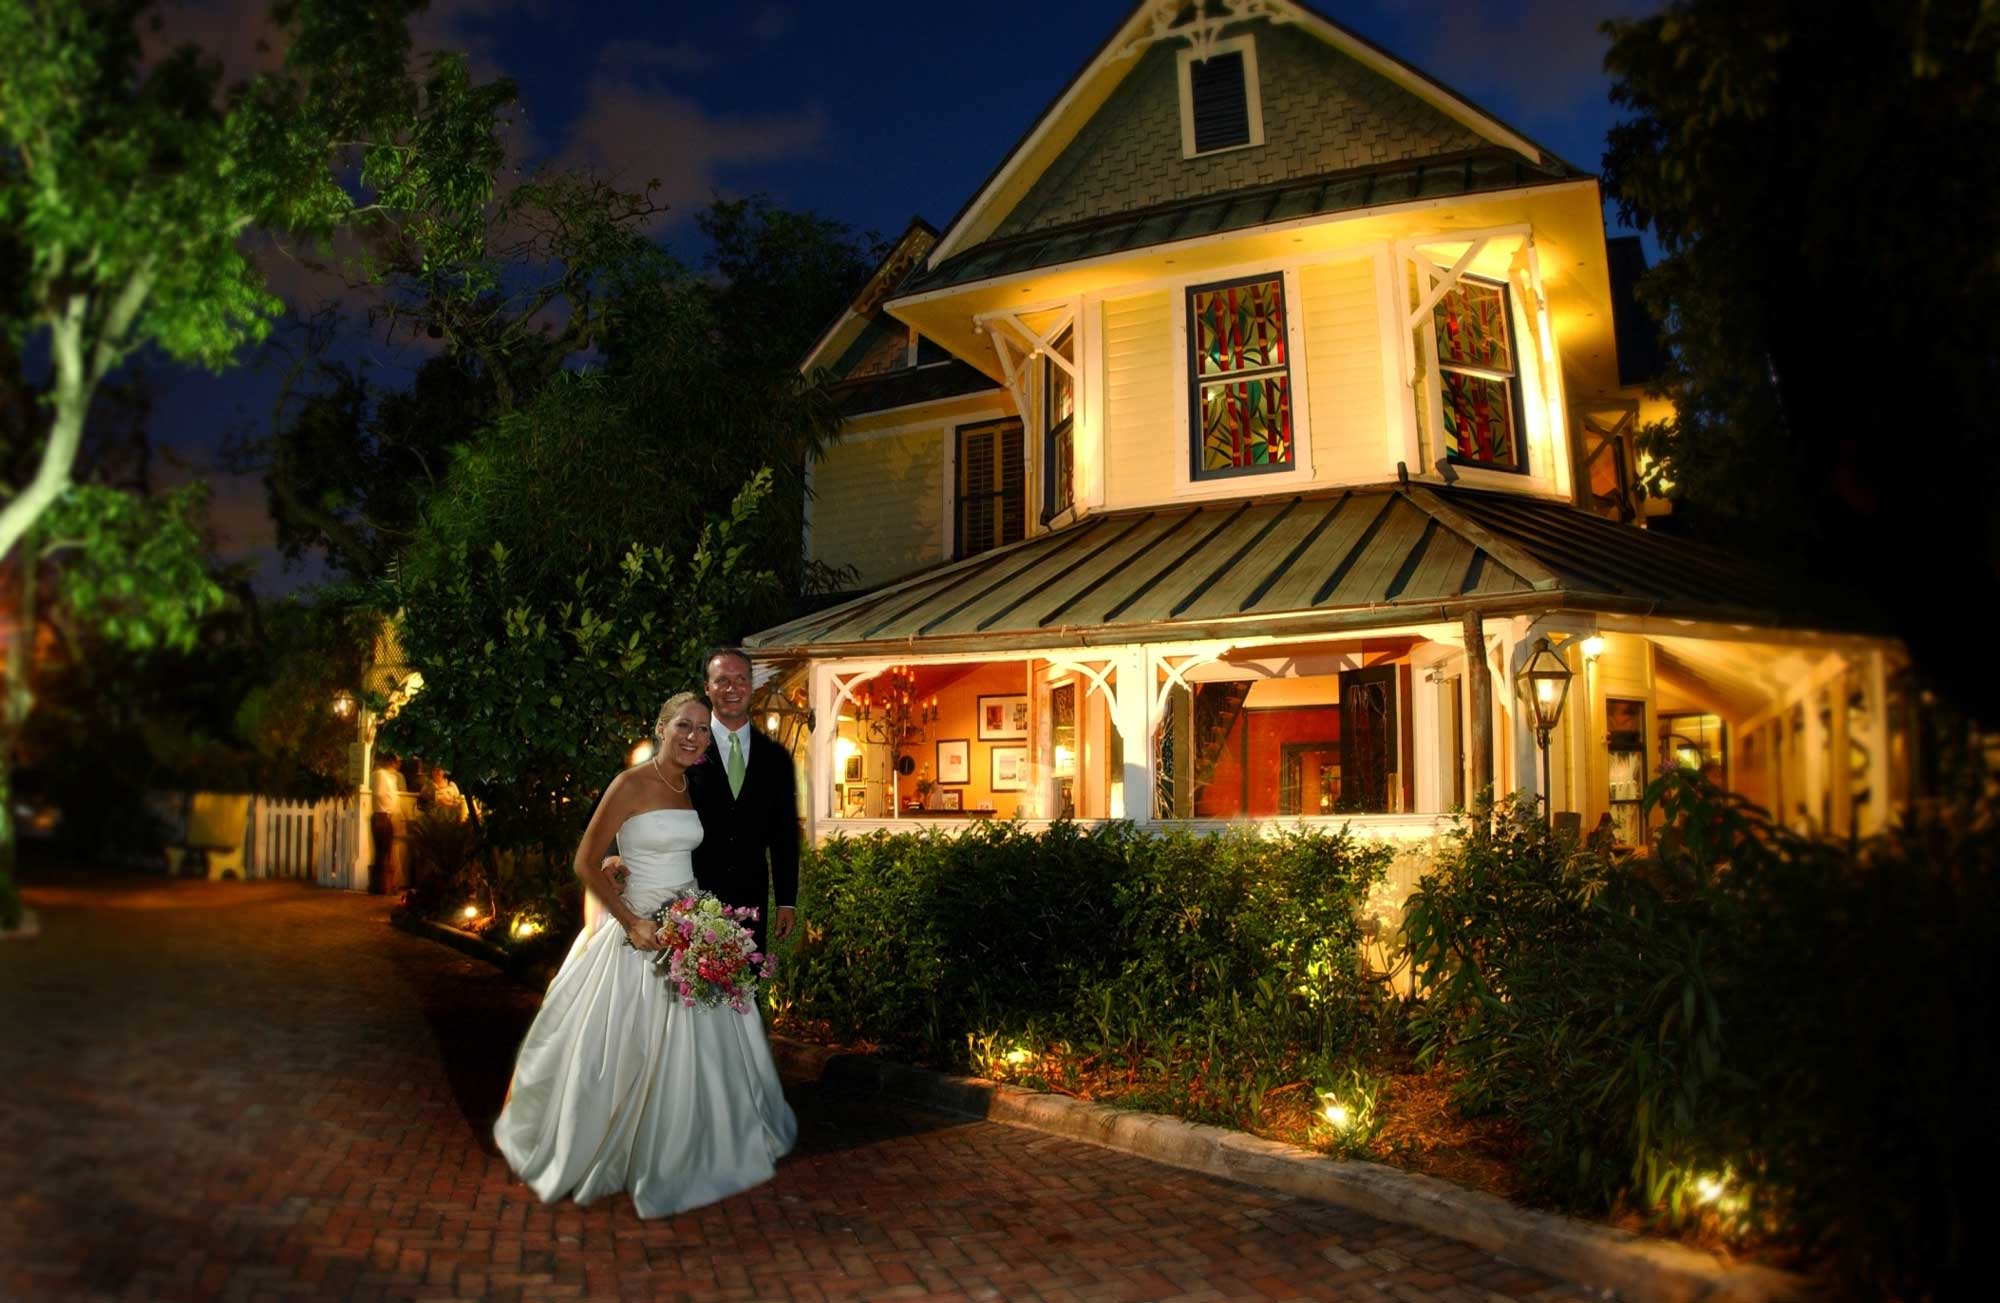 Top Florida Wedding Venues for Florida Destination Weddings | Best Places to Get Married in Florida | The Sundy House